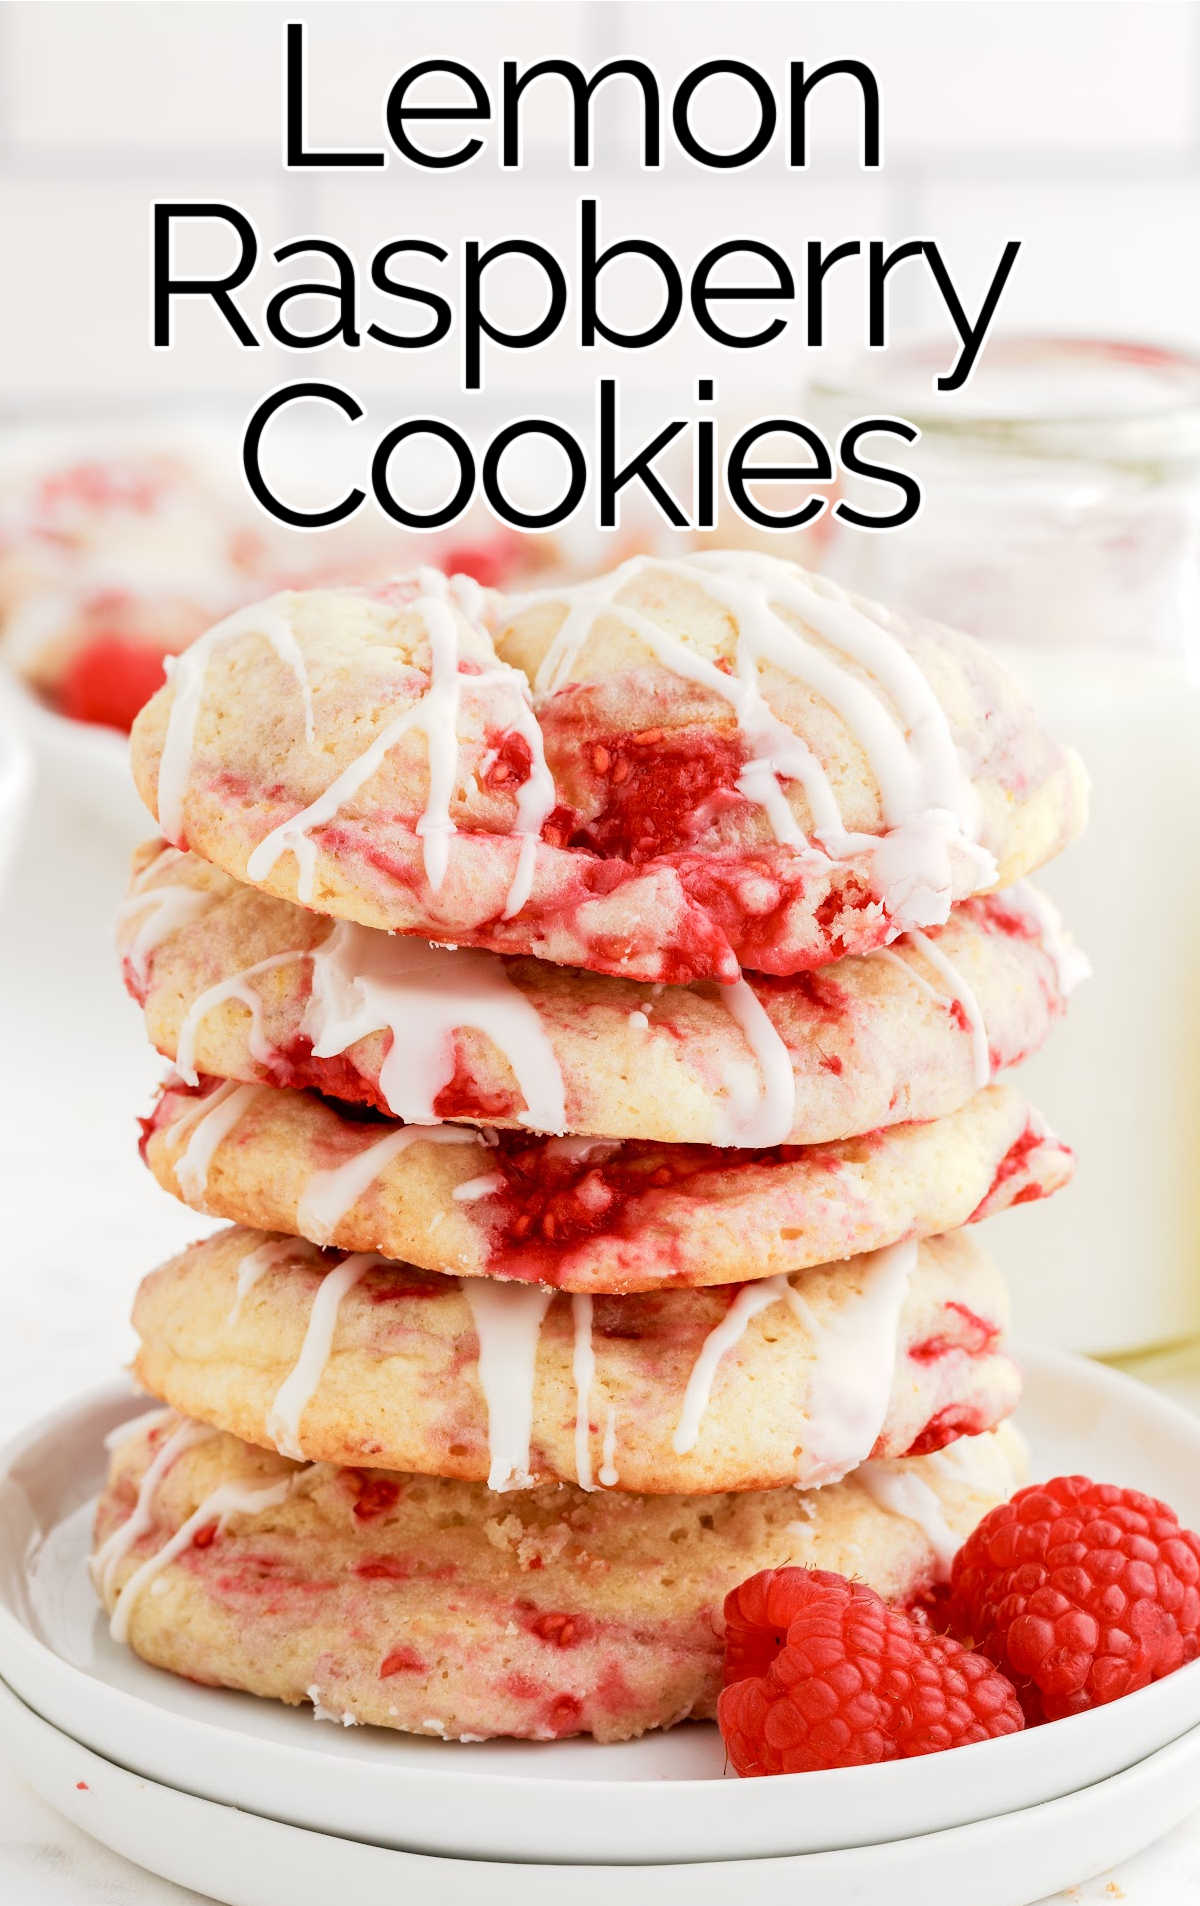 Lemon Raspberry Cookies stacked on top of each other on a plate